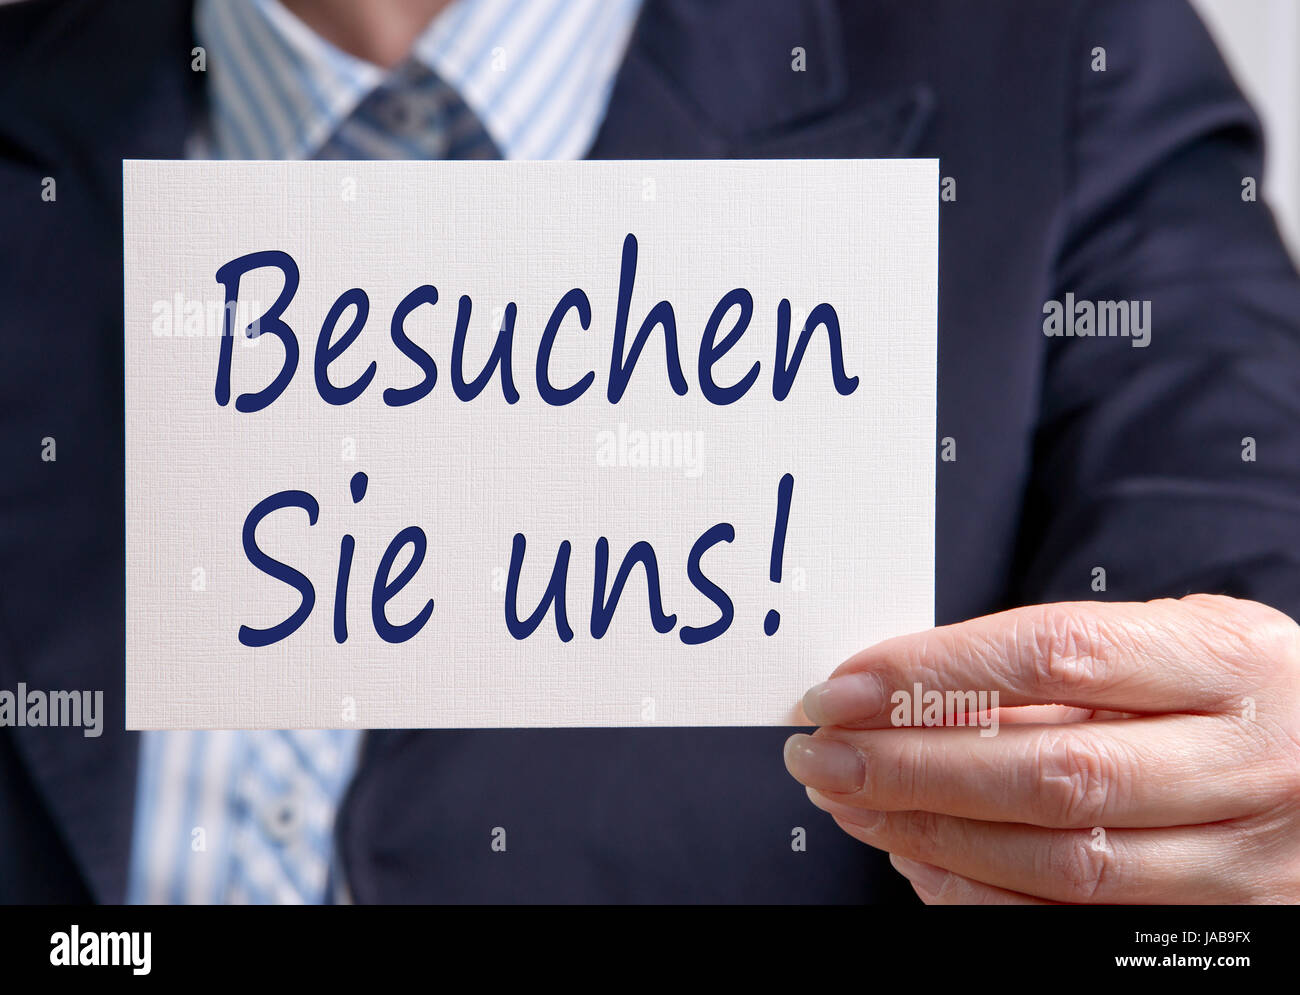 Besuchen High Resolution Stock Photography and Images - Alamy